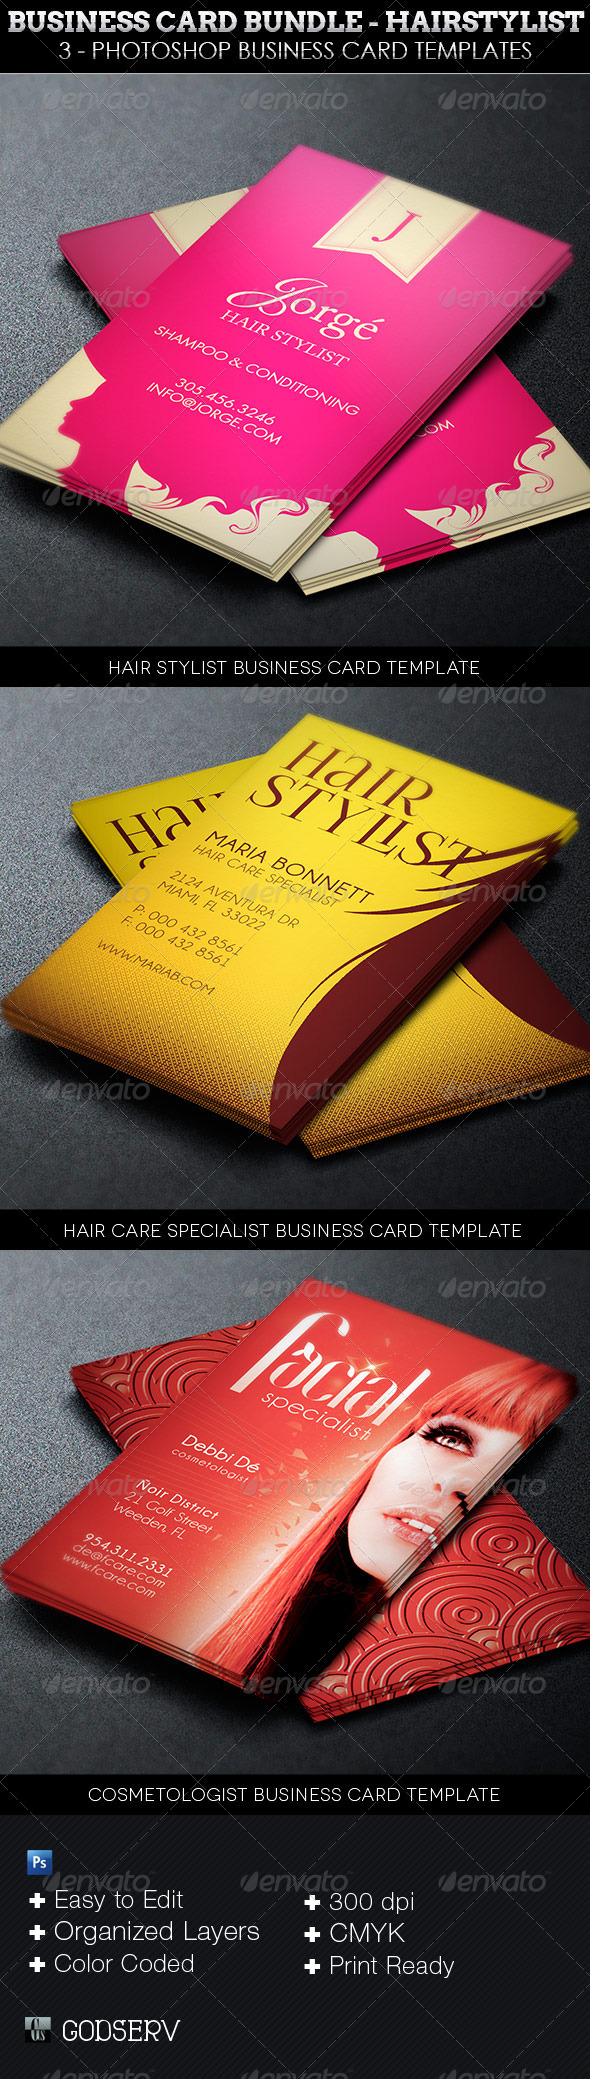 Business Card Template Bundle-Hairstylist